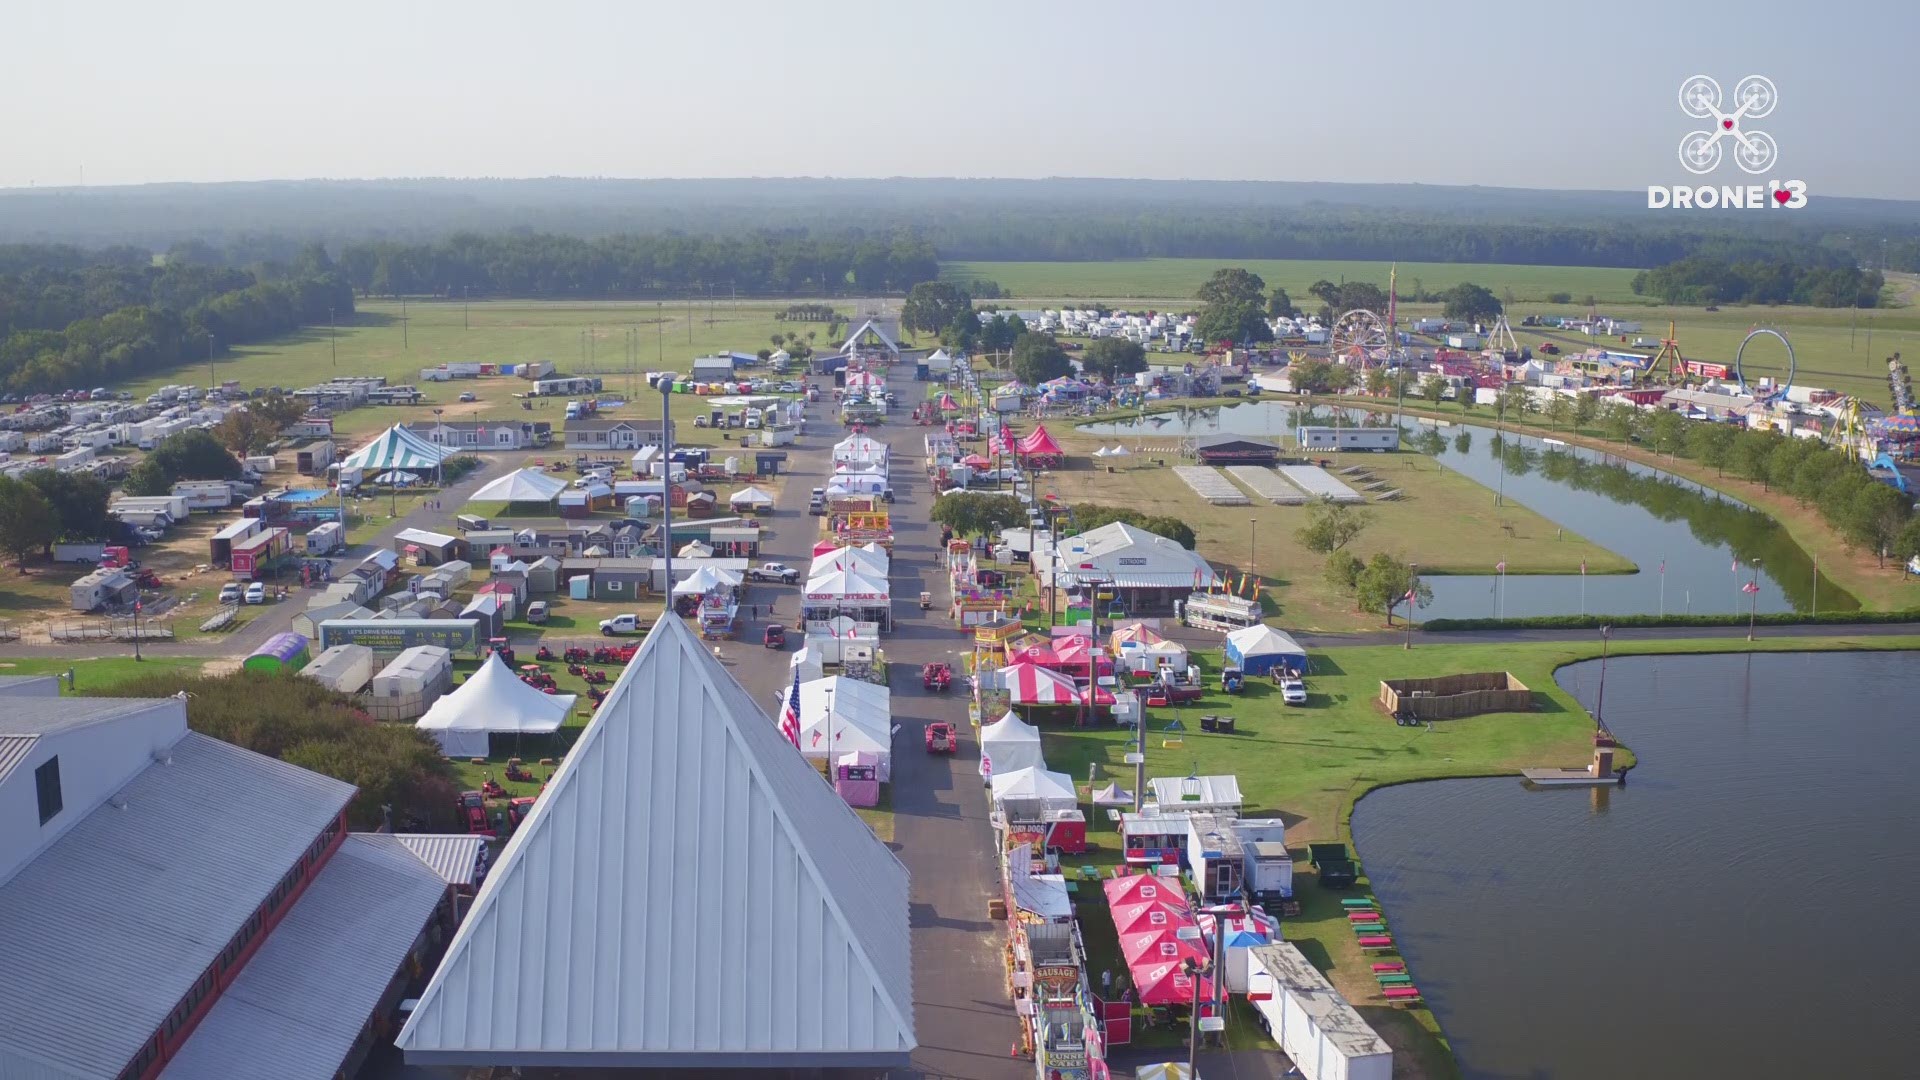 The Georgia National Fair sits inside an 1100 acre complex and drew nearly a half-million visitors in 2018